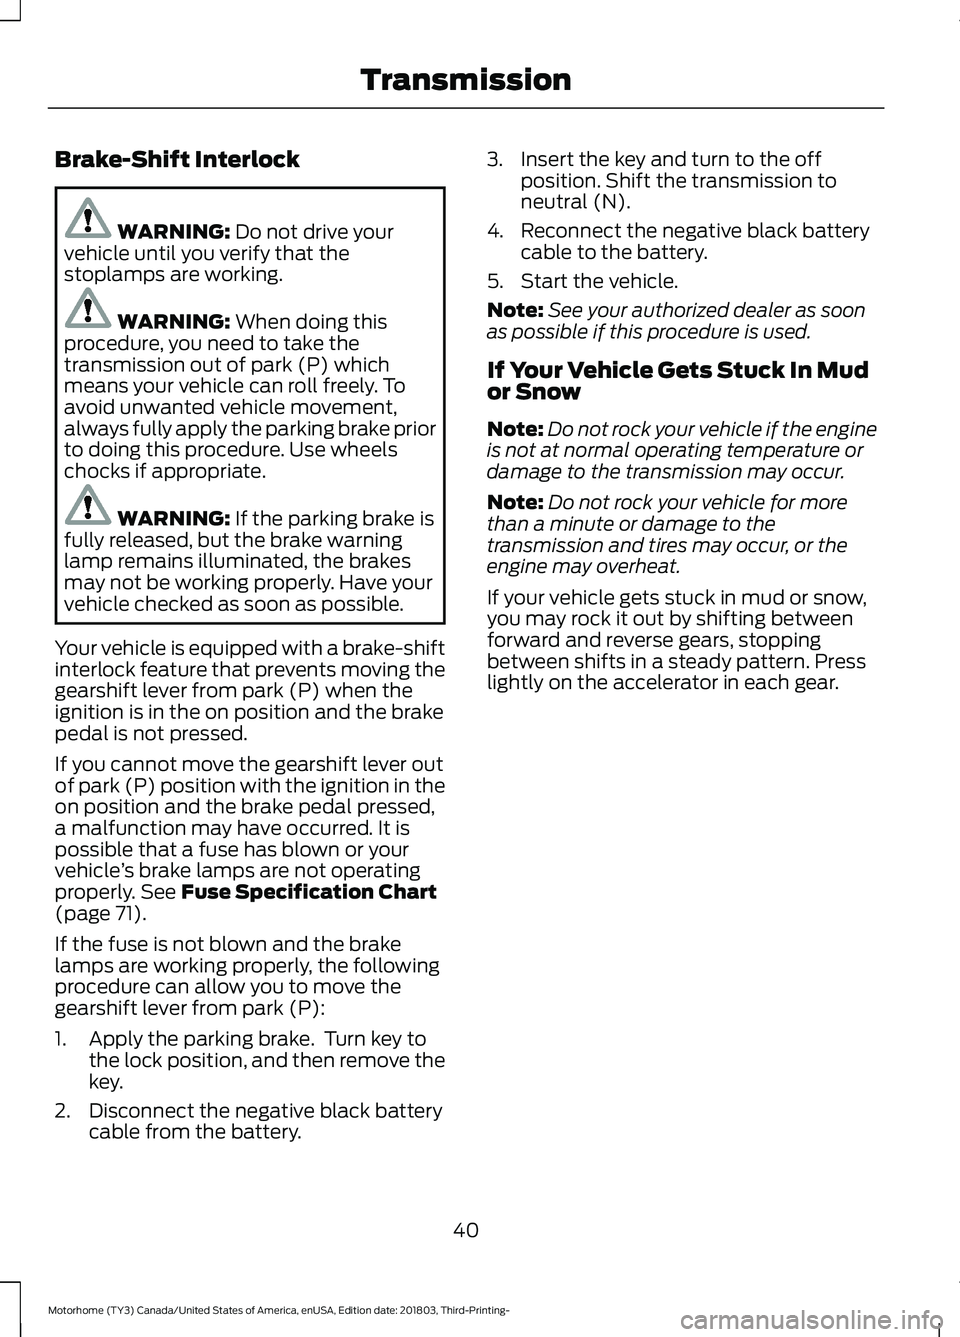 FORD F-53 2019  Owners Manual Brake-Shift Interlock
WARNING: Do not drive yourvehicle until you verify that thestoplamps are working.
WARNING: When doing thisprocedure, you need to take thetransmission out of park (P) whichmeans y